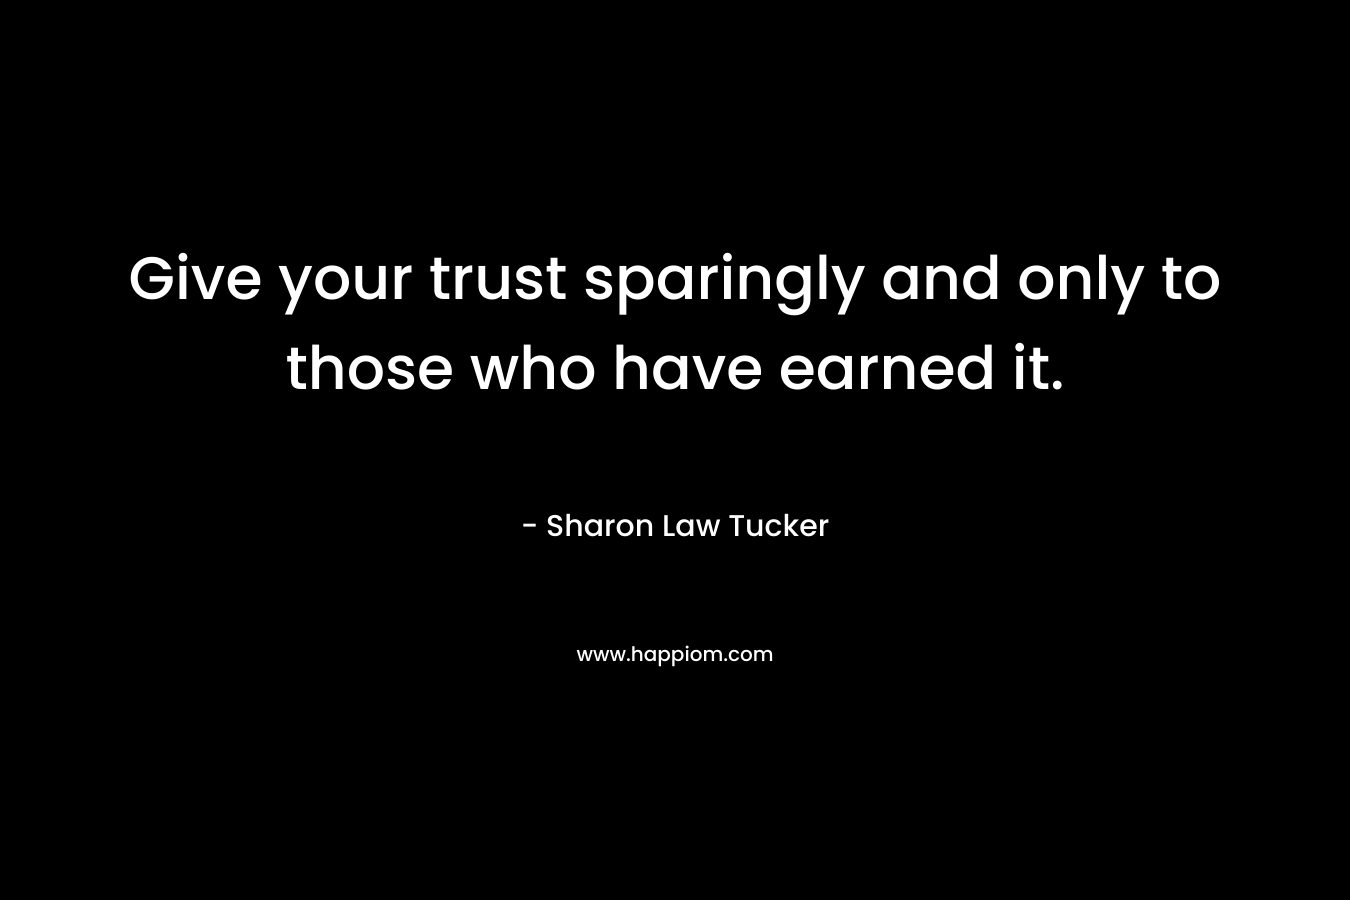 Give your trust sparingly and only to those who have earned it.